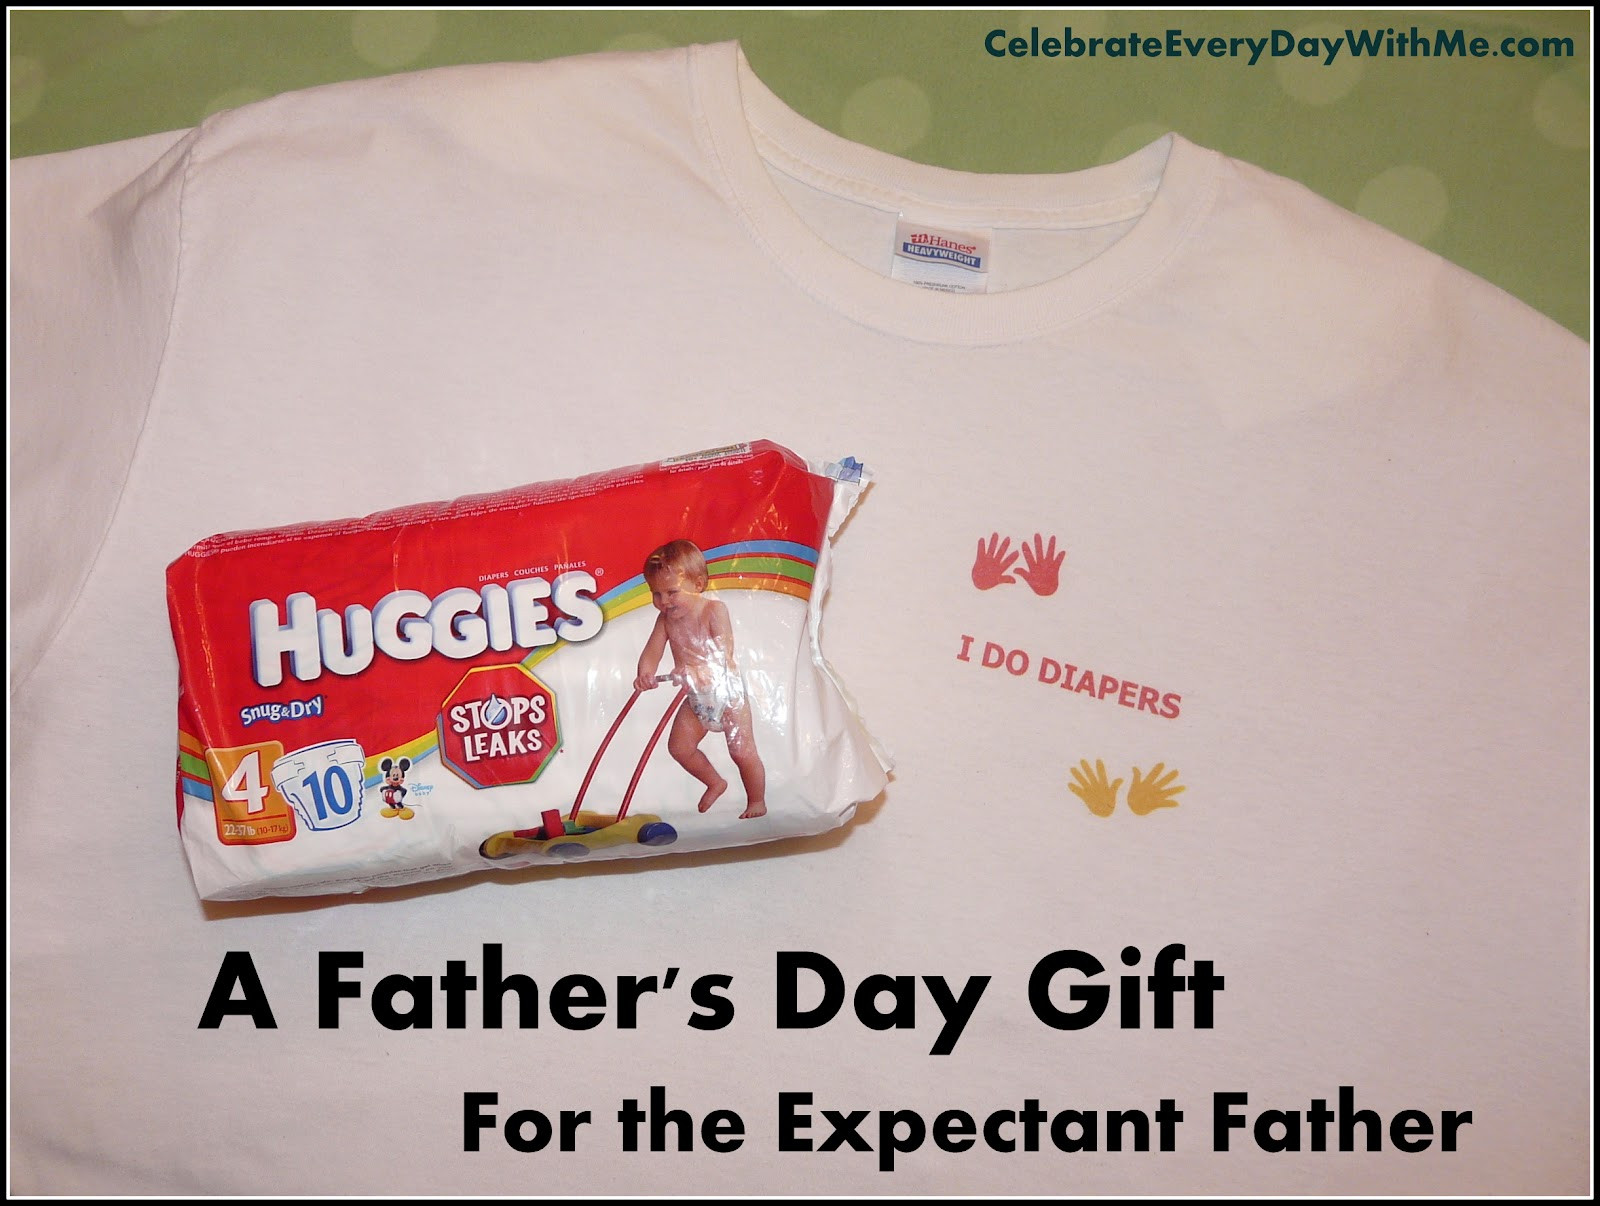 Gift Ideas For Expectant Fathers
 A Father’s Day Gift for the Expectant Father